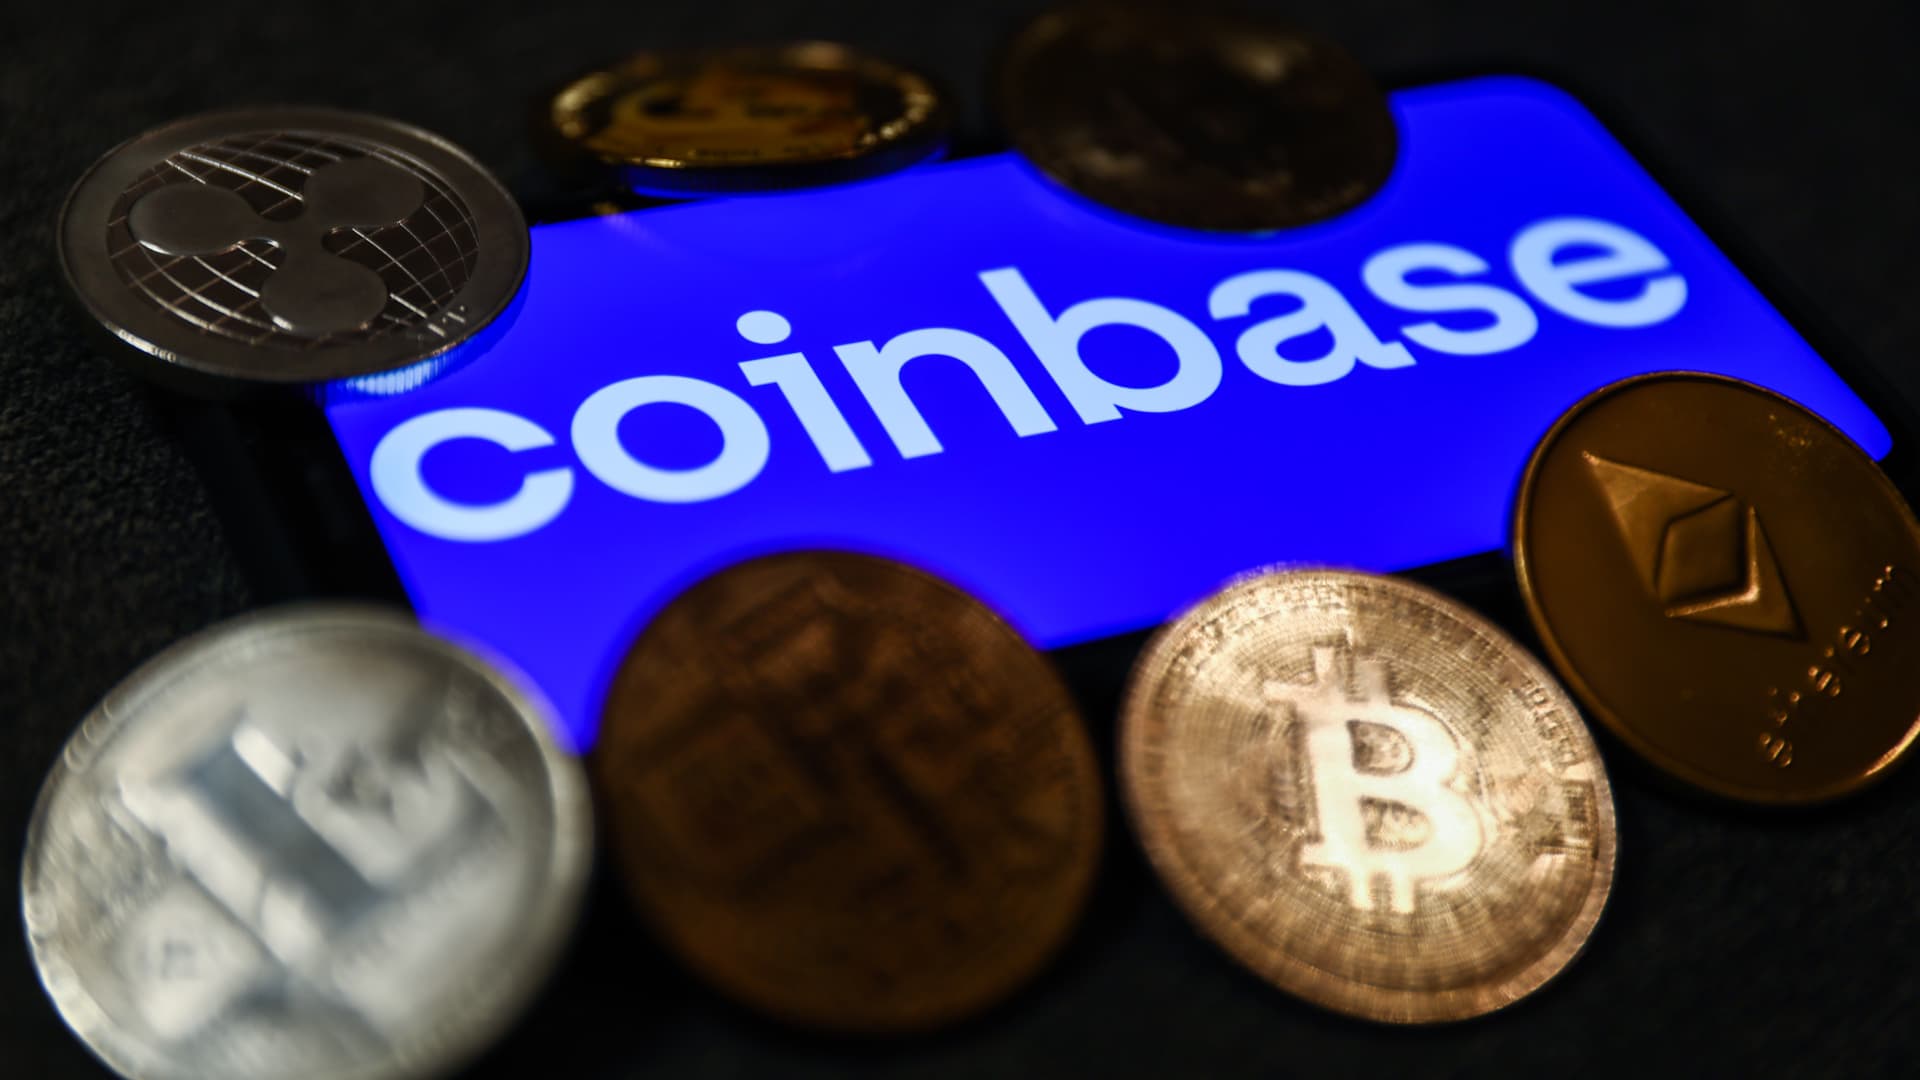 Oppenheimer says Coinbase can still surge 90% even after FTX’s ‘Lehman Brothers moment’